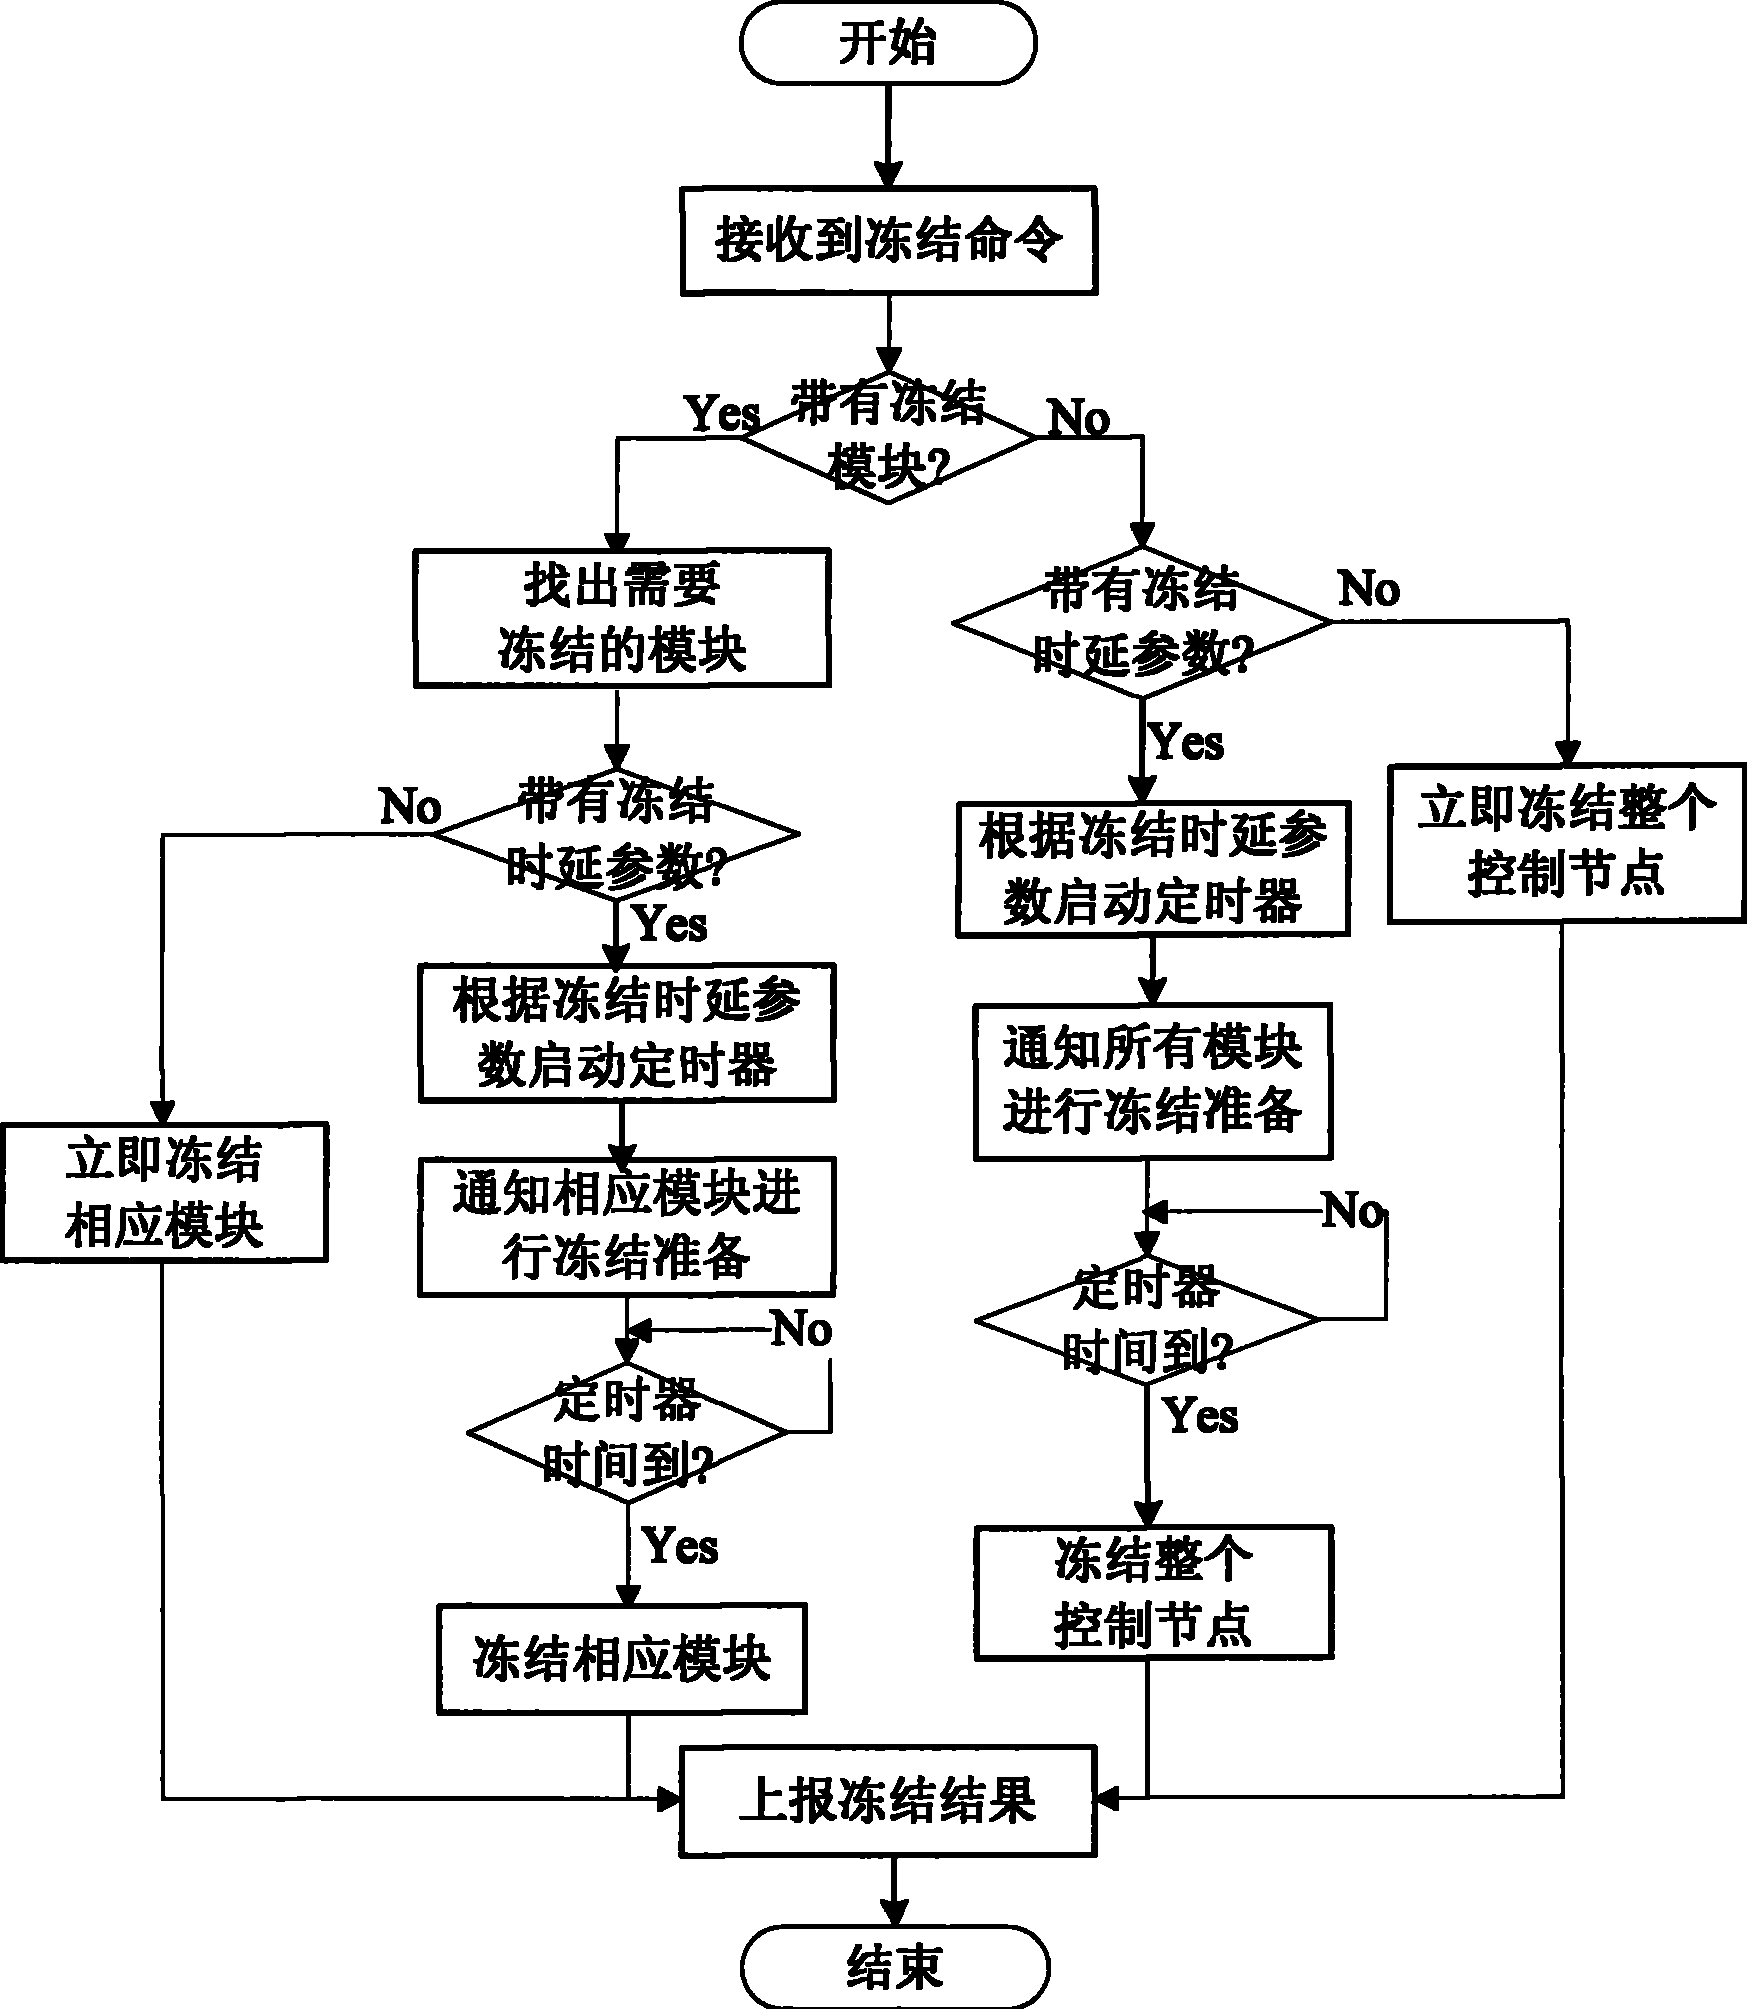 Function freezing/defreezing method in automatic switch optical network